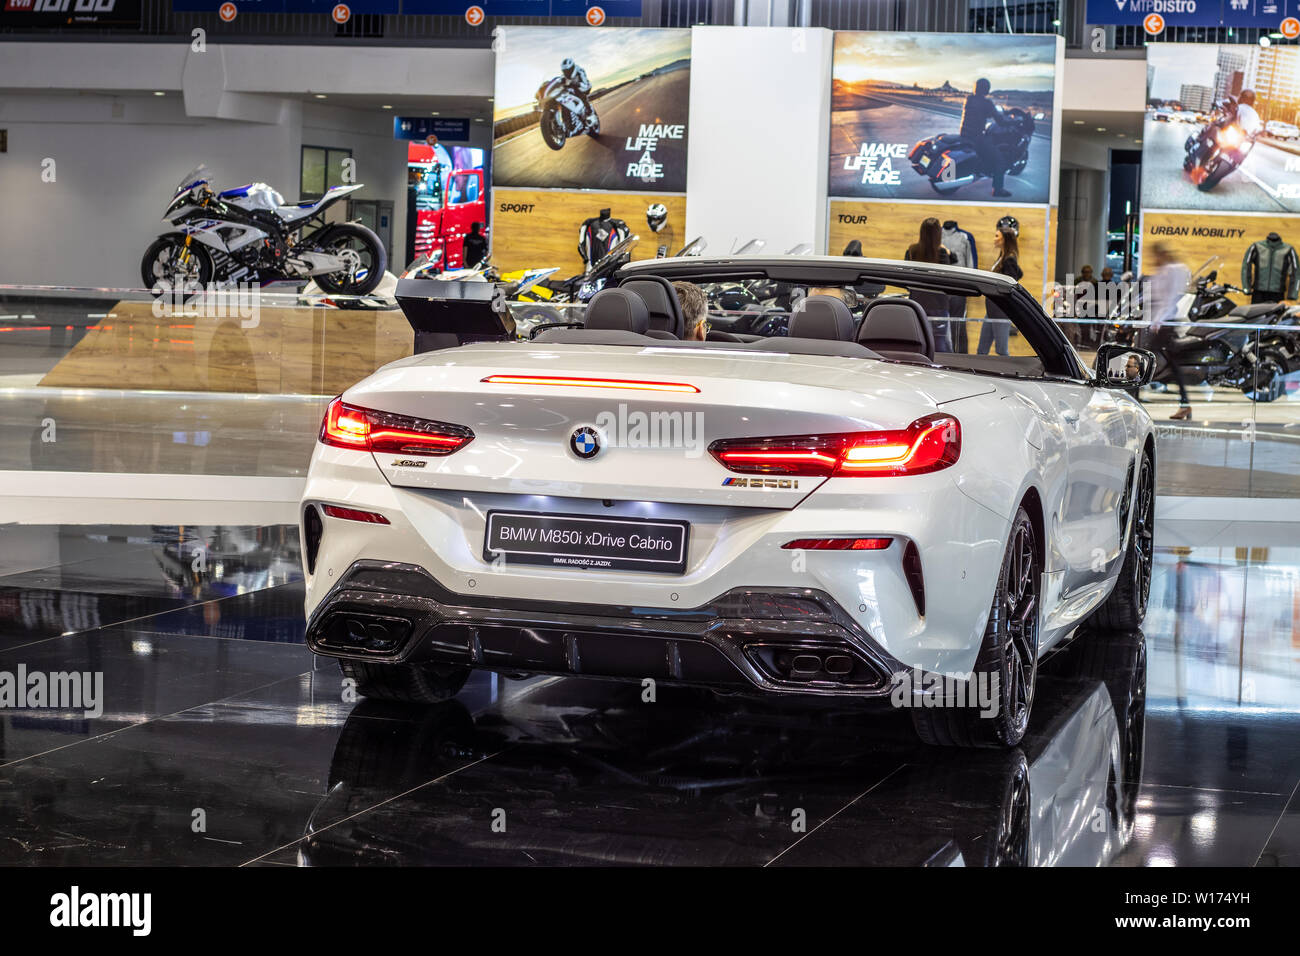 Poznan, Poland, March 2019: BMW The 8 Series xDrive Cabrio 850i, Poznan International Motor Show, G14 cabriolet car manufactured and marketed by BMW Stock Photo